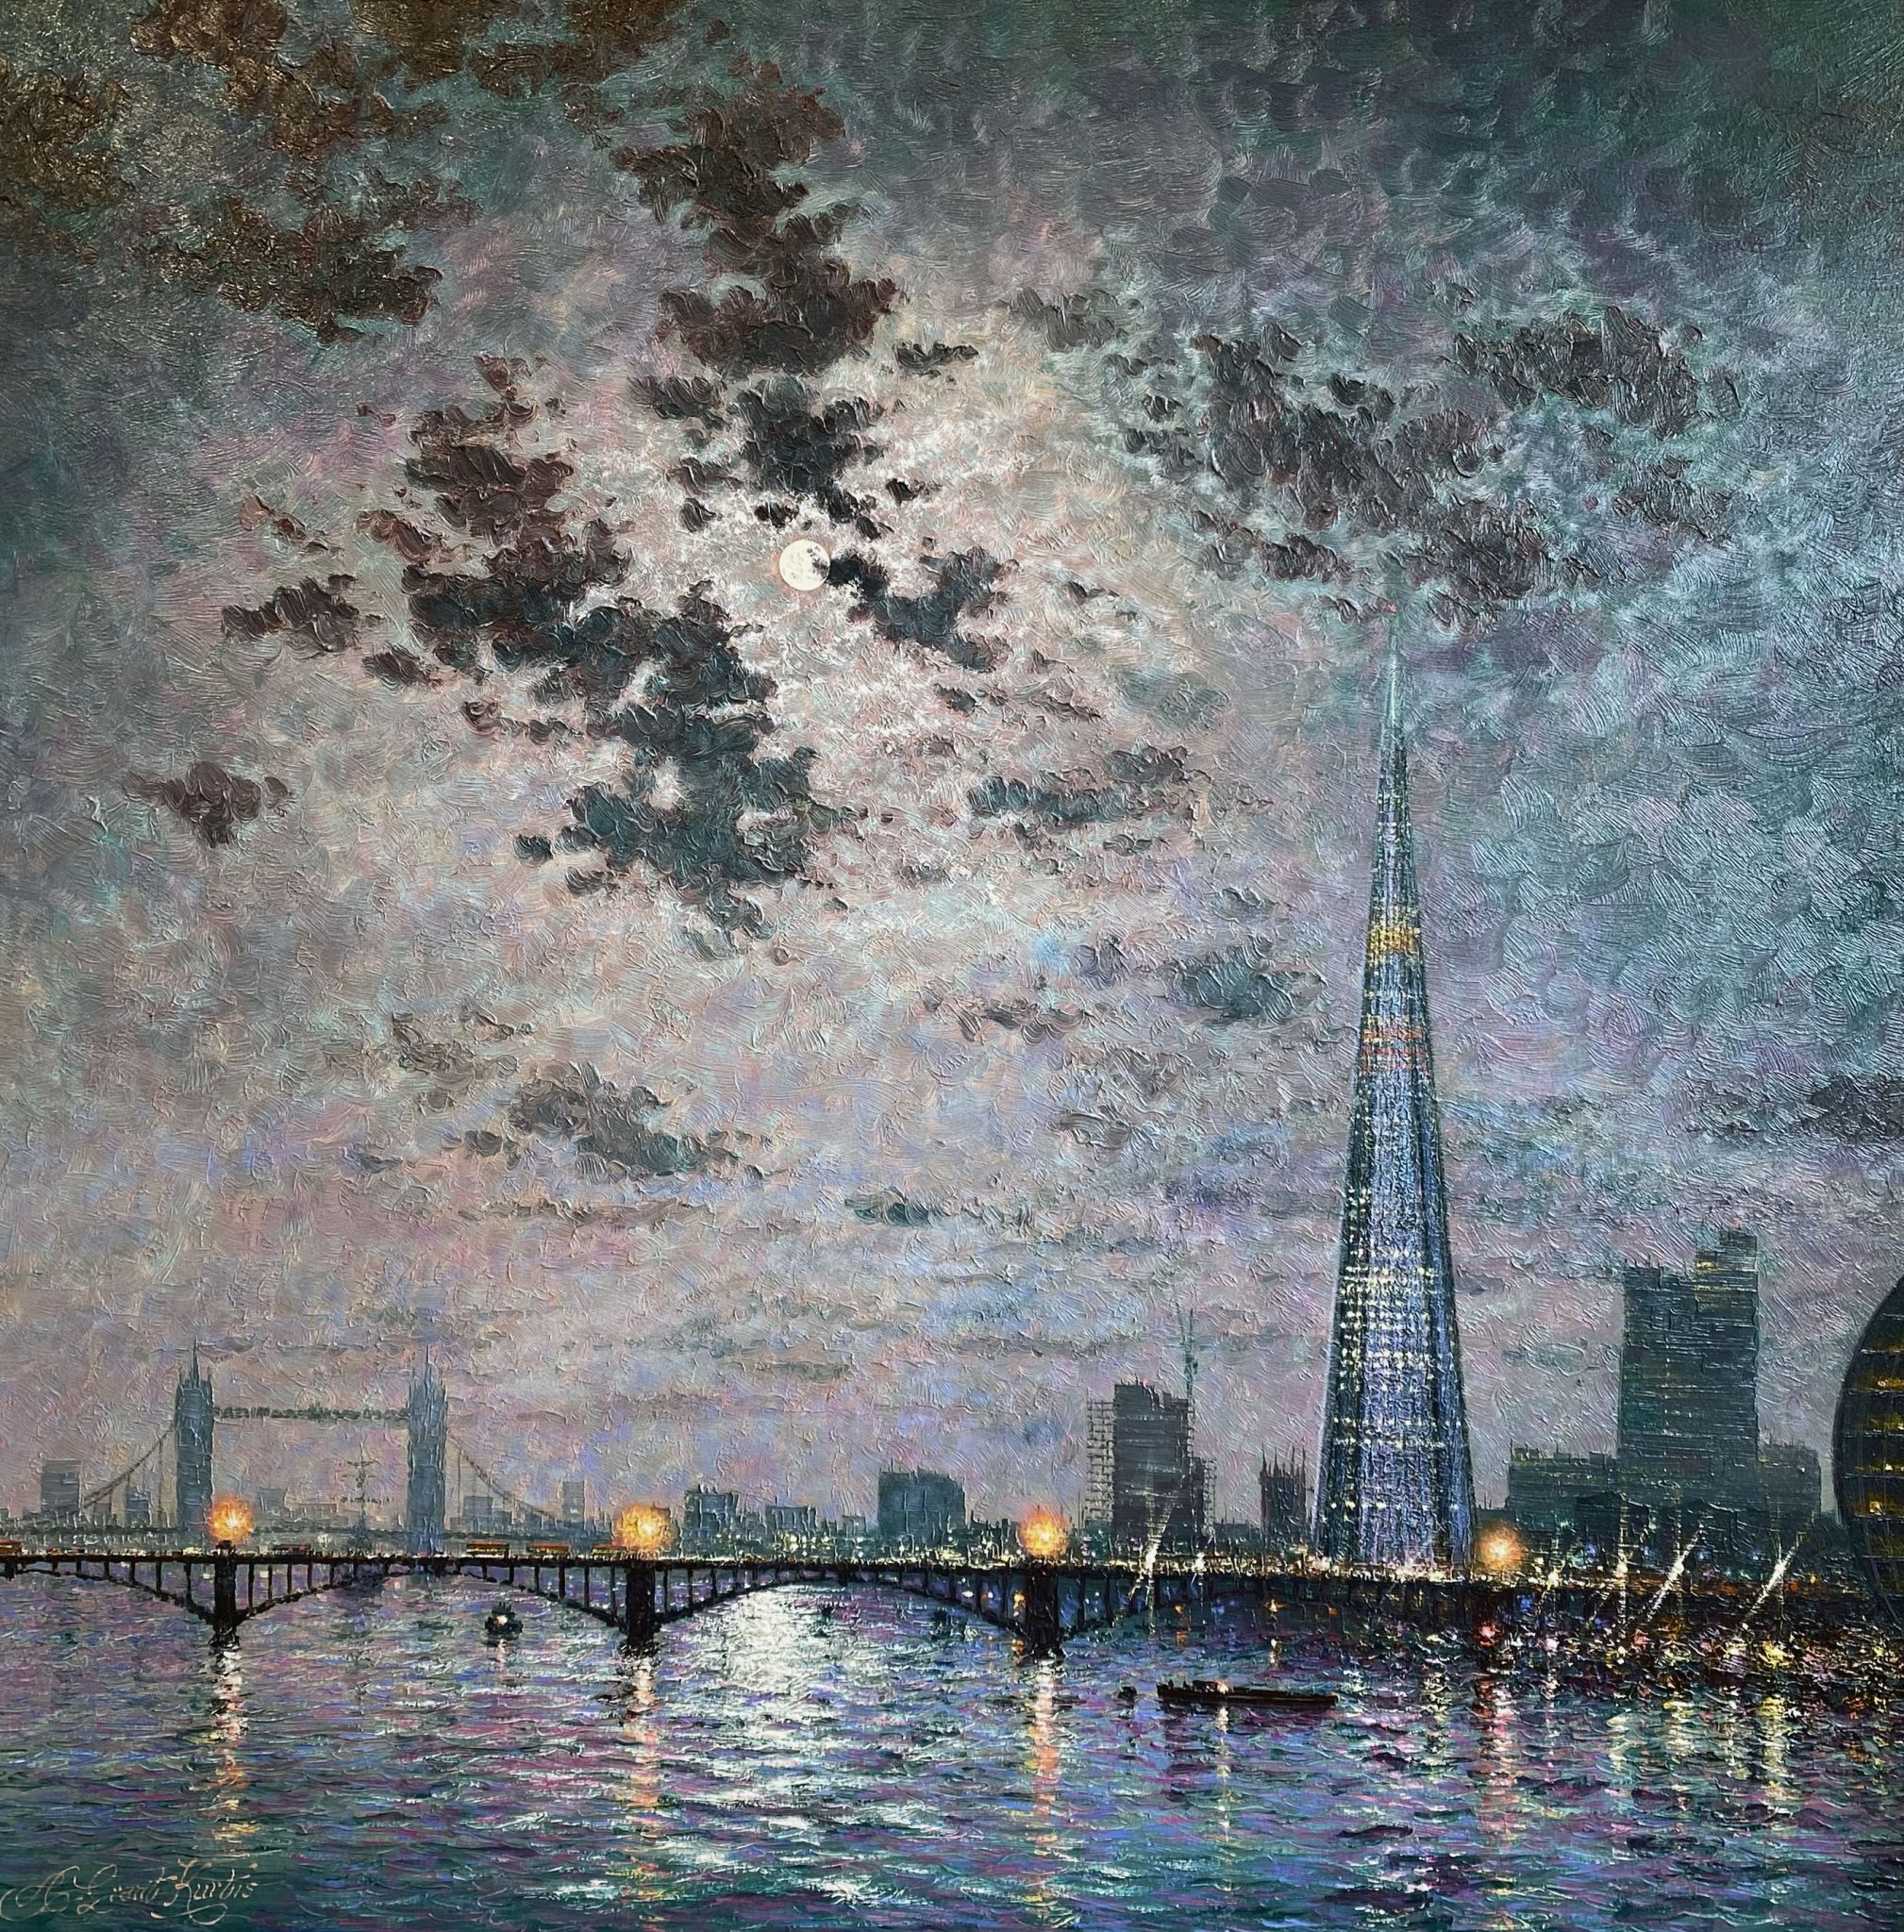 Nocturnal Reflections in London on The Thames by the artist Andrew Grant Kurtis